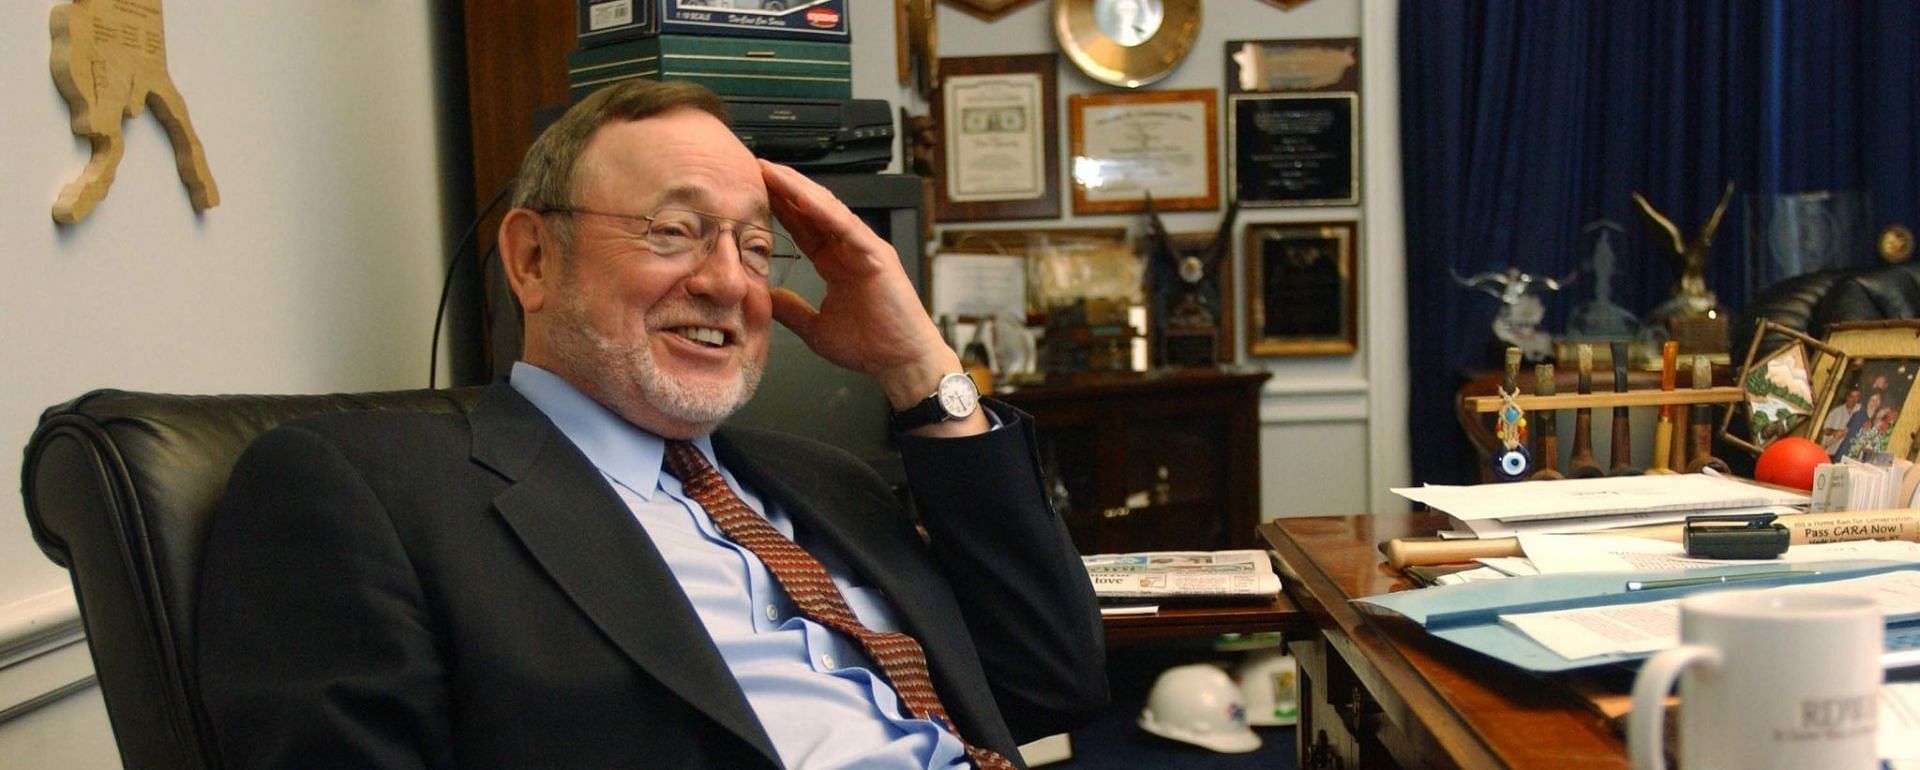 Twitter remembered Don Young after his passing (Image via Scott J. Ferrell/Getty Images)